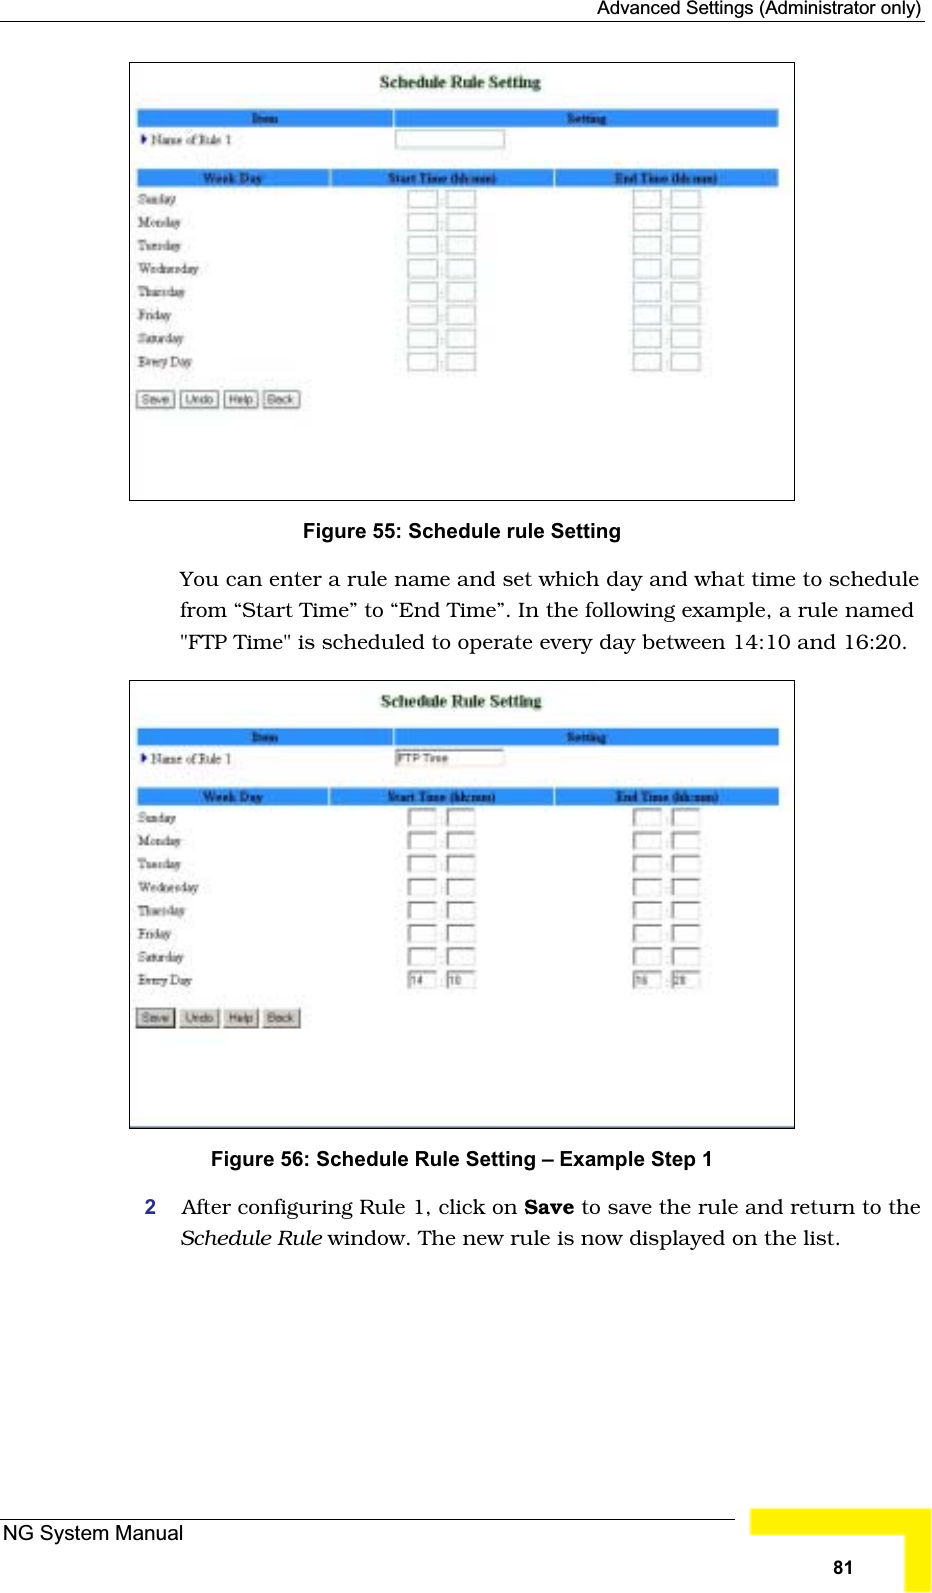 Advanced Settings (Administrator only)Figure 55: Schedule rule Setting You can enter a rule name and set which day and what time to schedulefrom “Start Time” to “End Time”. In the following example, a rule named&quot;FTP Time&quot; is scheduled to operate every day between 14:10 and 16:20. Figure 56: Schedule Rule Setting – Example Step 1 2After configuring Rule 1, click on Save to save the rule and return to theSchedule Rule window. The new rule is now displayed on the list.NG System Manual81